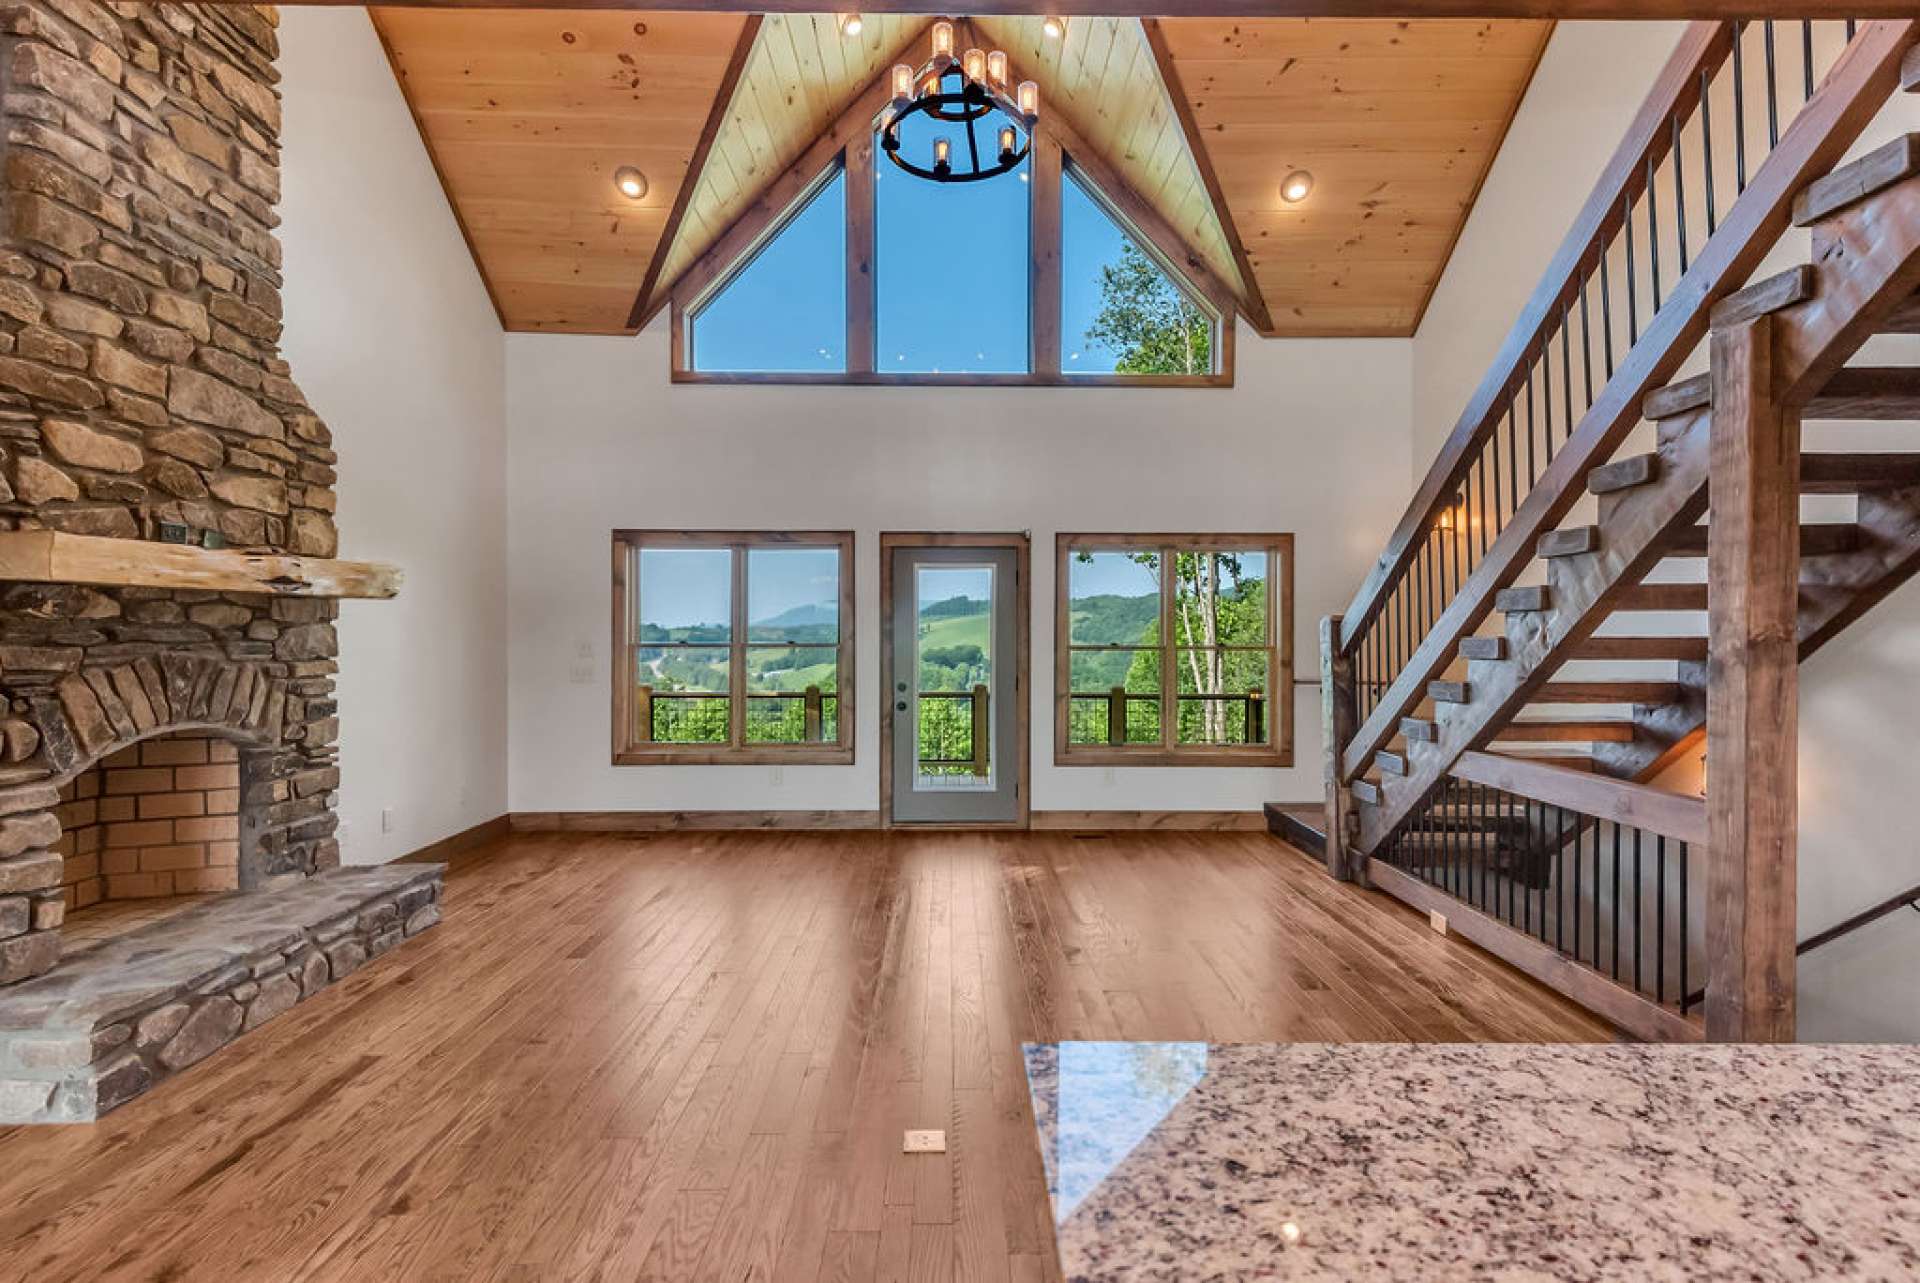 Spacious great room features high vaulted ceiling with lots of windows to take advantage of the natural light and the beautiful view.